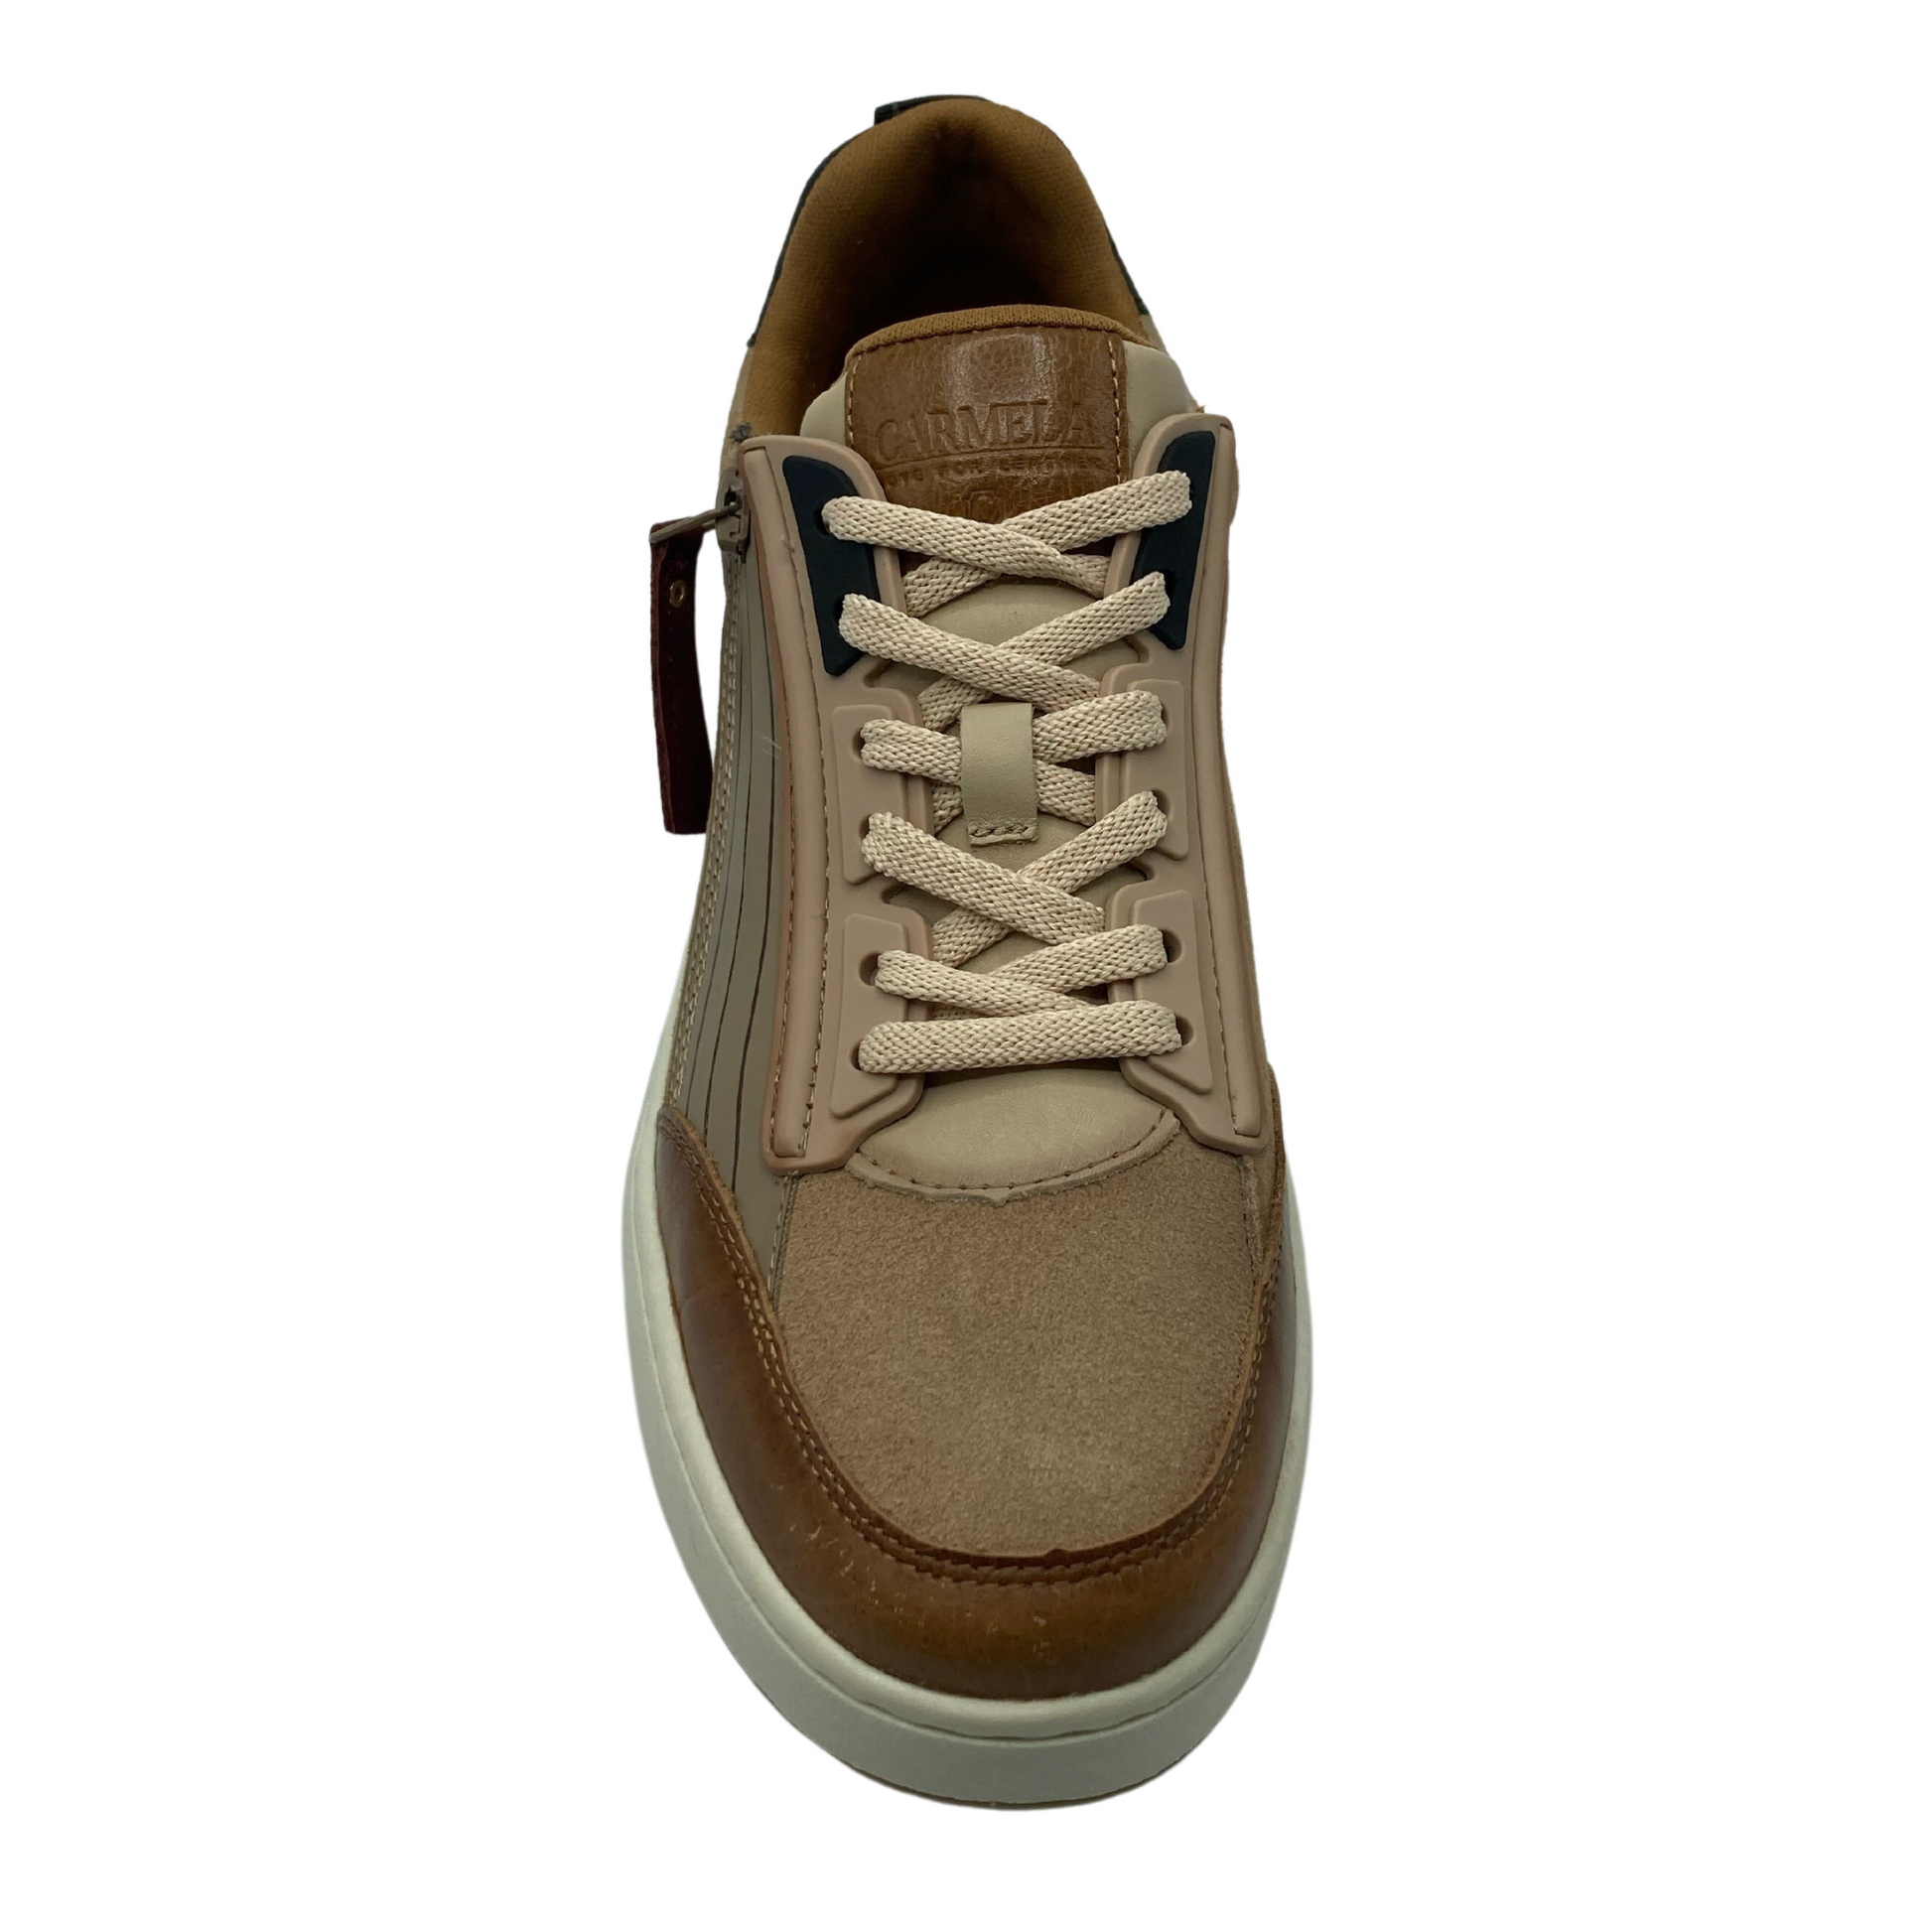 Top view of brown leather sneaker with cream laces and side zipper closure